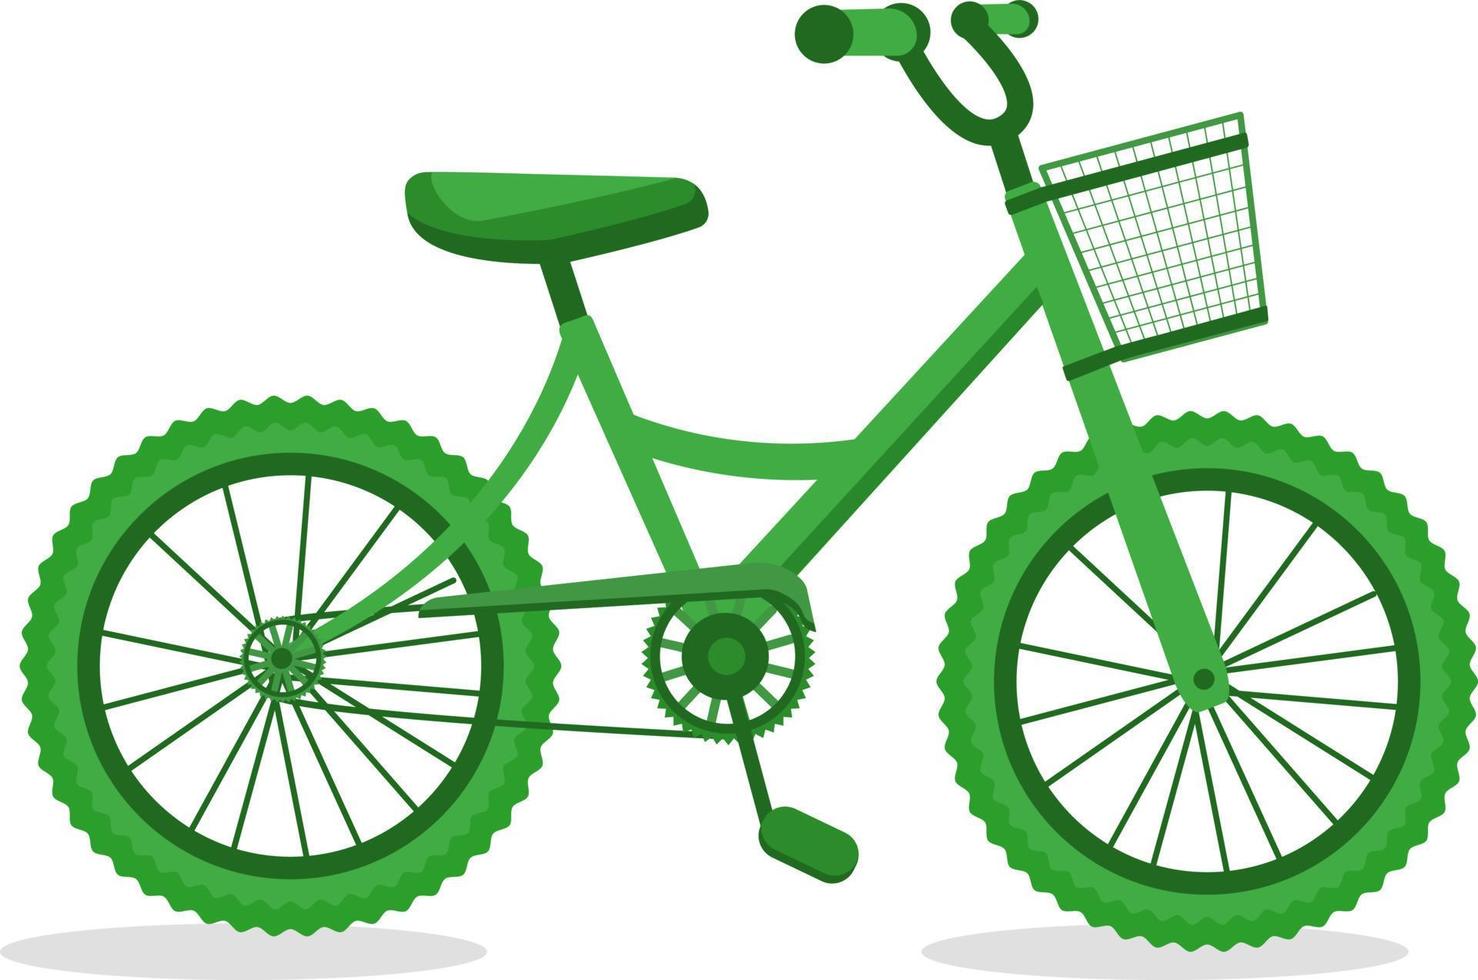 Go bike for green trip. Eco technology symbol of the future. Cute bike of green color for people and protection the environment. Isolated illustration on white background. Vector illustration.